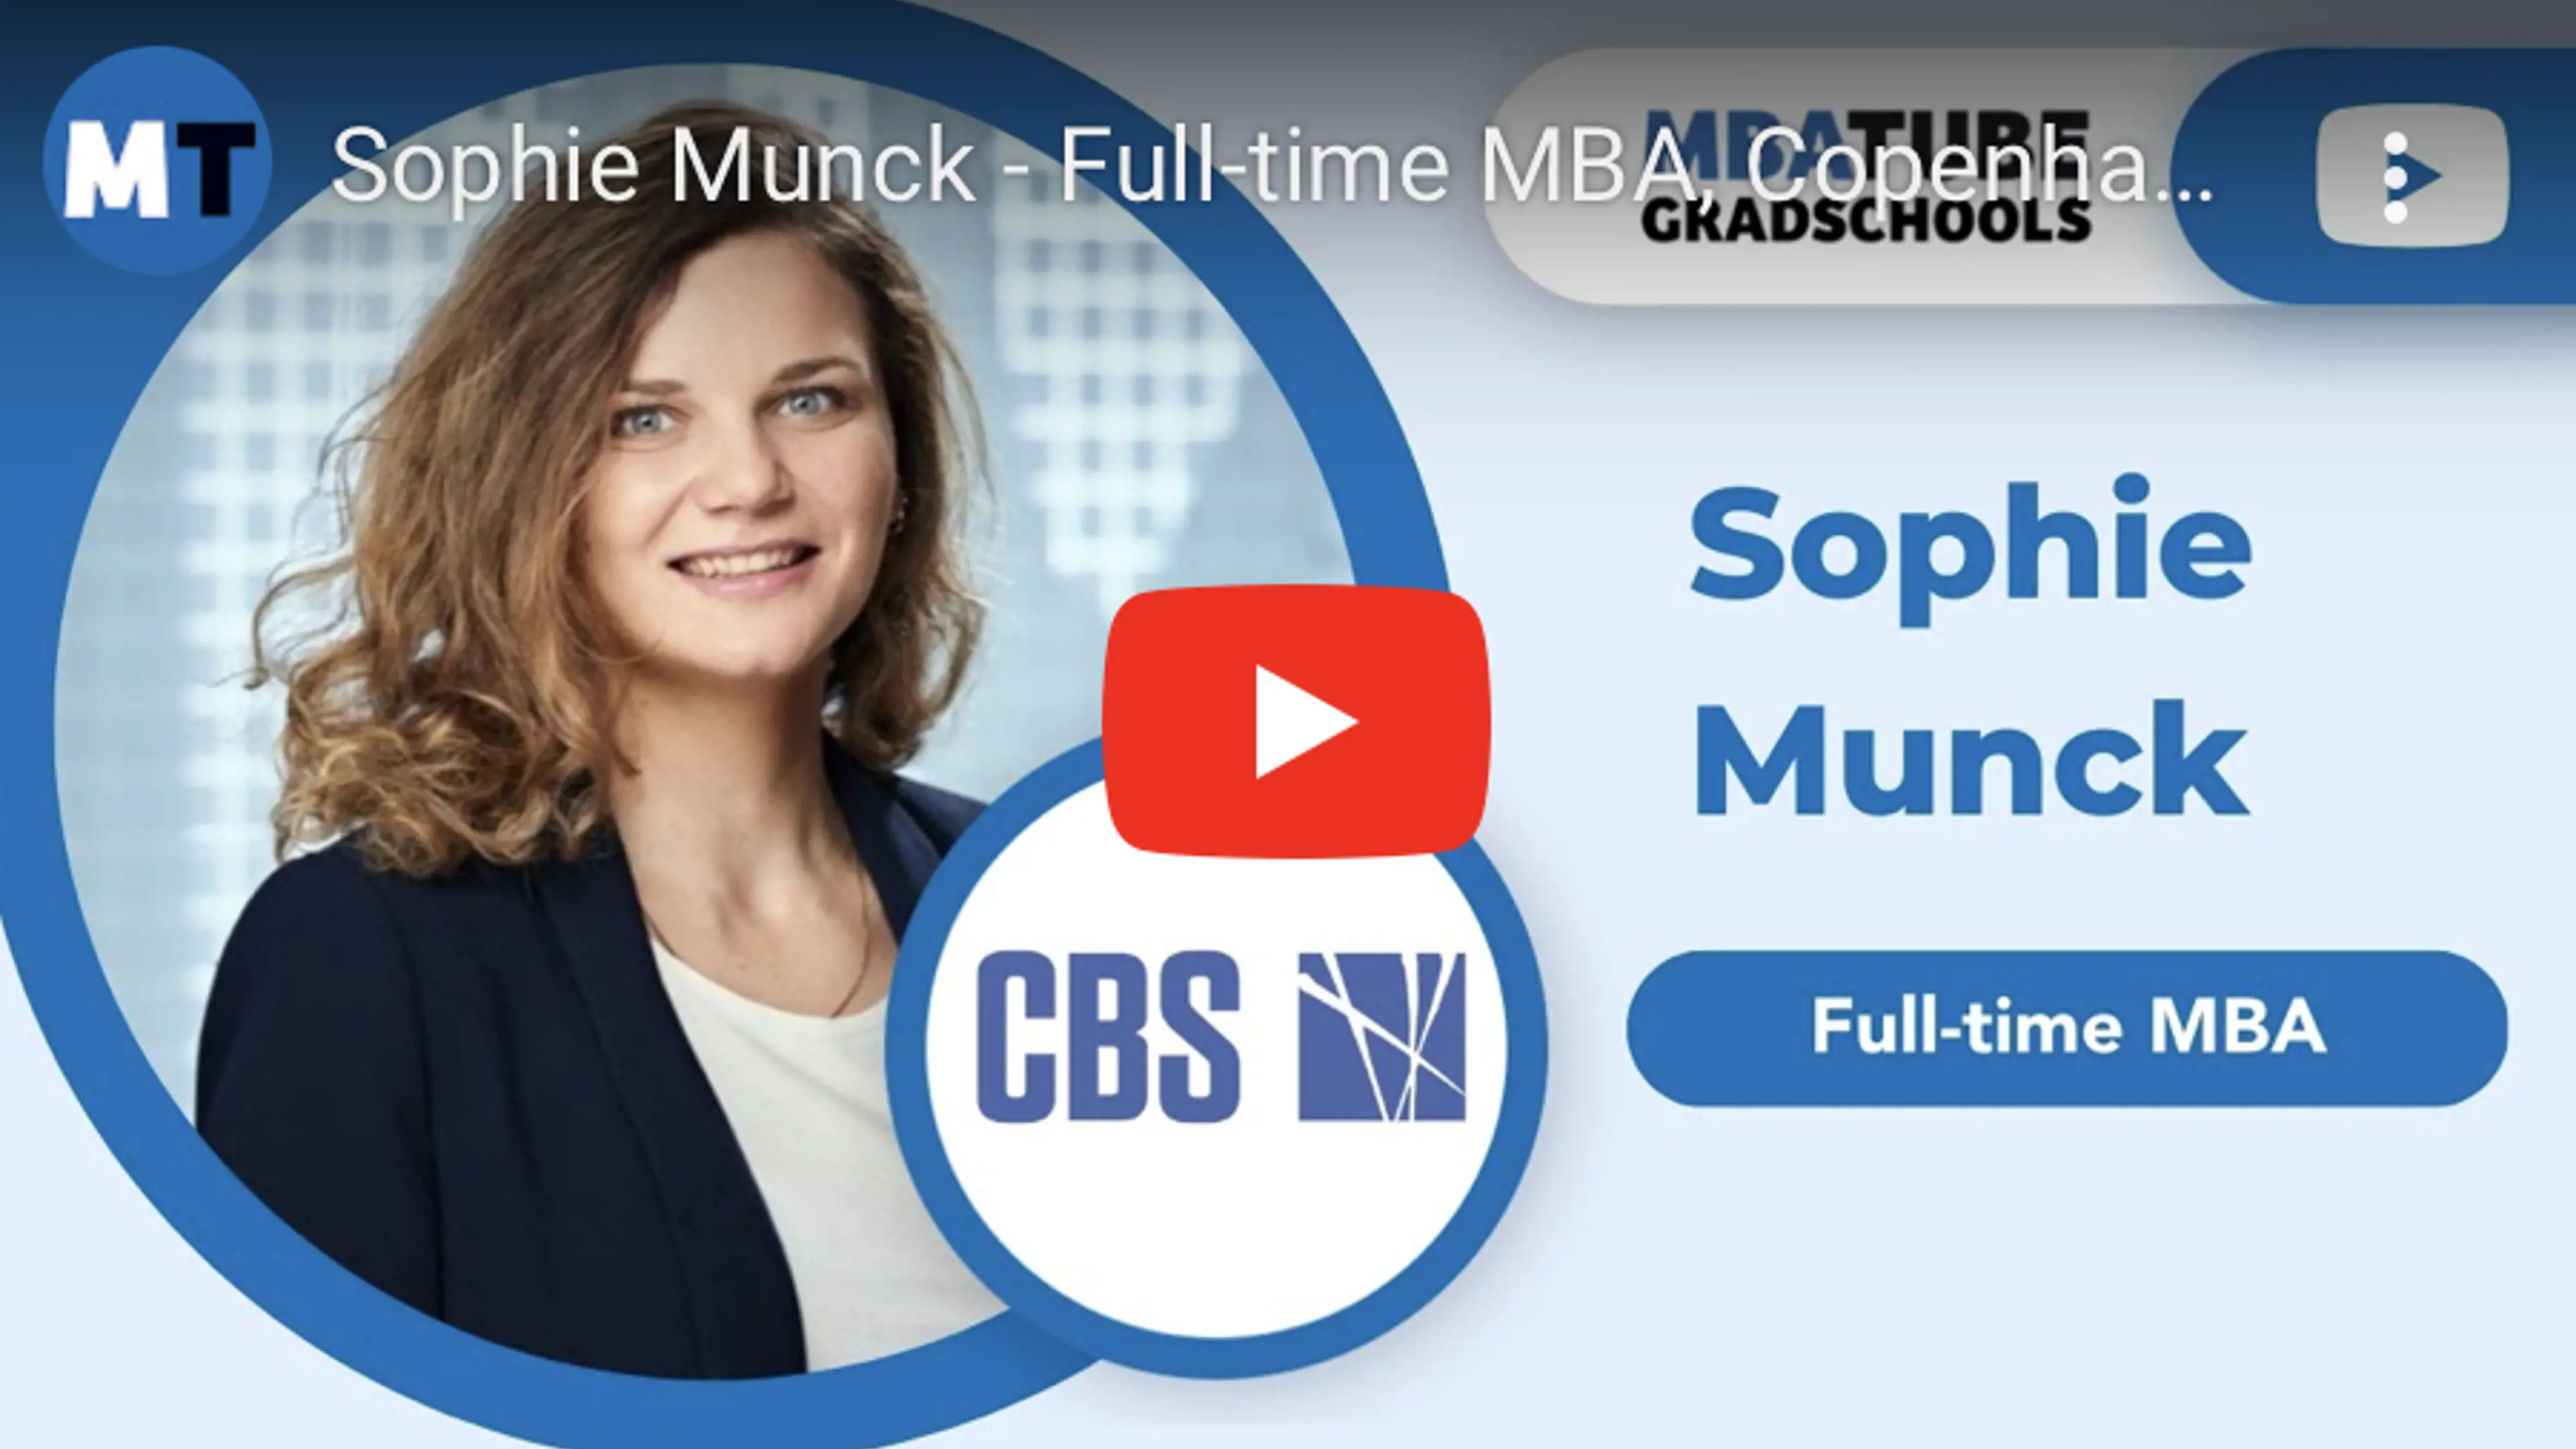 Youtube video about Sophie Munck, who studied the Full-Time MBA in Copenhagen